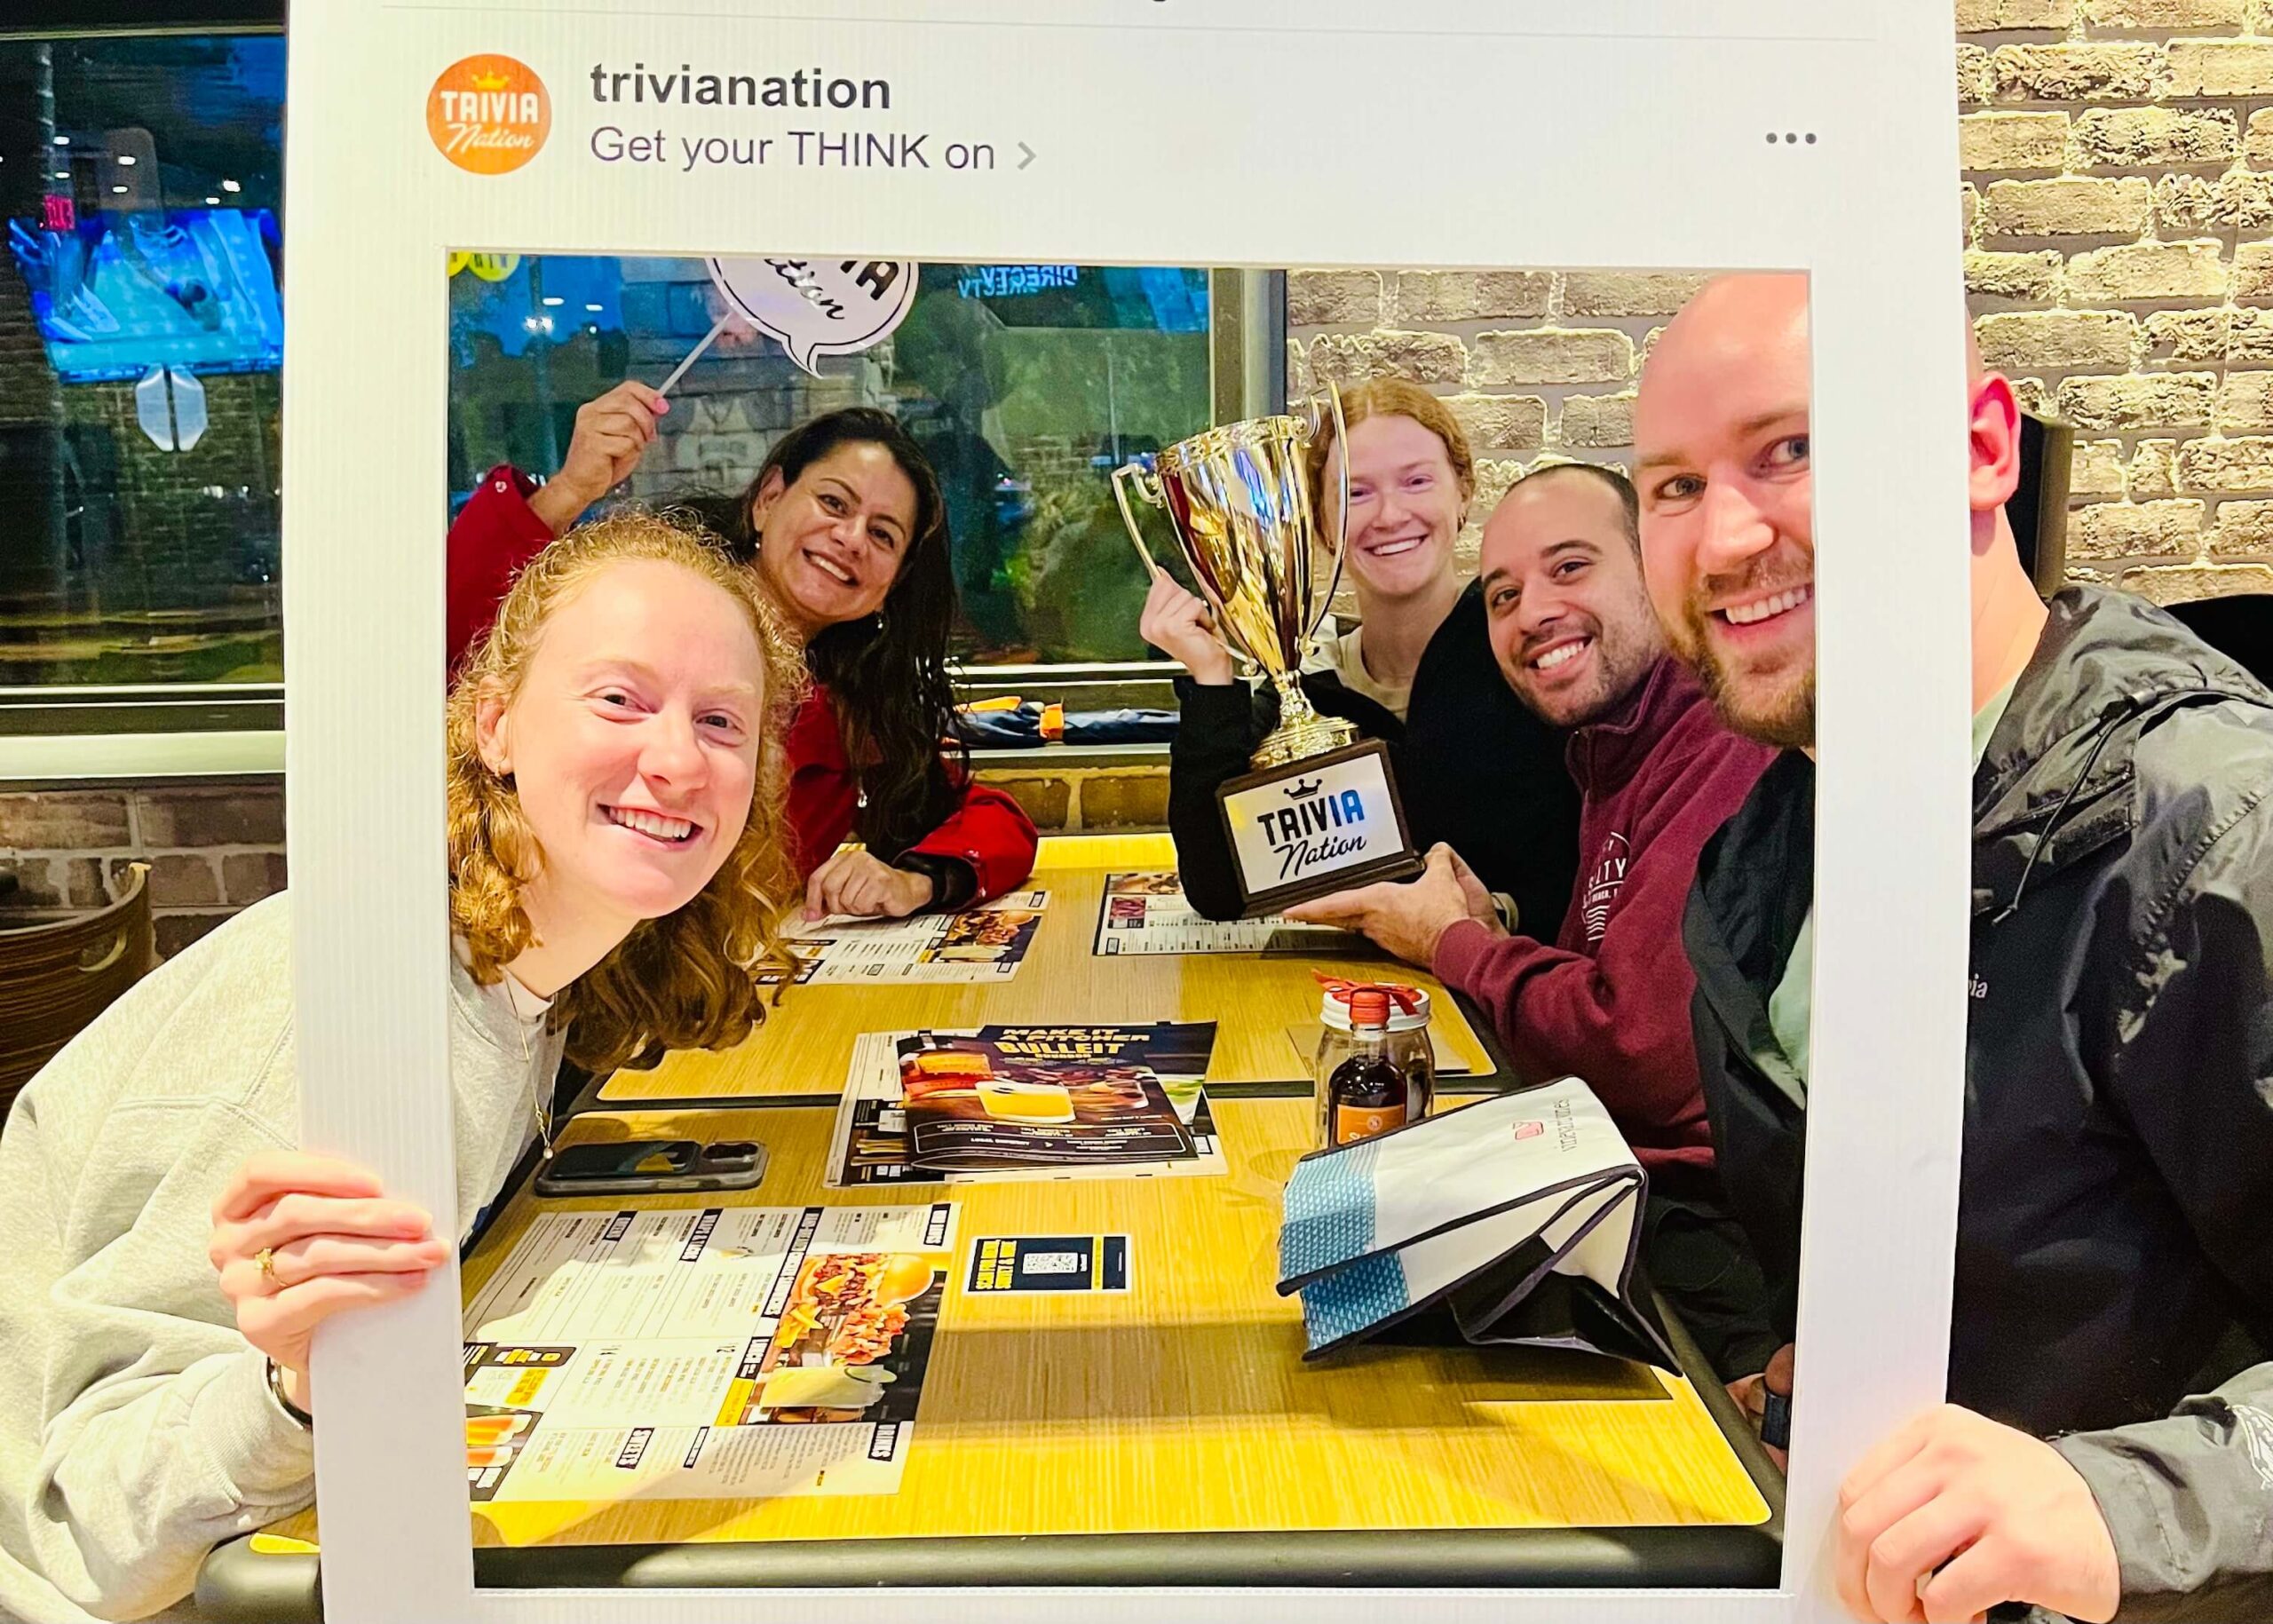 Buffalo Wild Wings Plantation FL 33388 trivia night: group of young adults and a woman gathered together around a table smiling with Trivia Nation props and a trophy including an Instagram Polaroid framing their faces